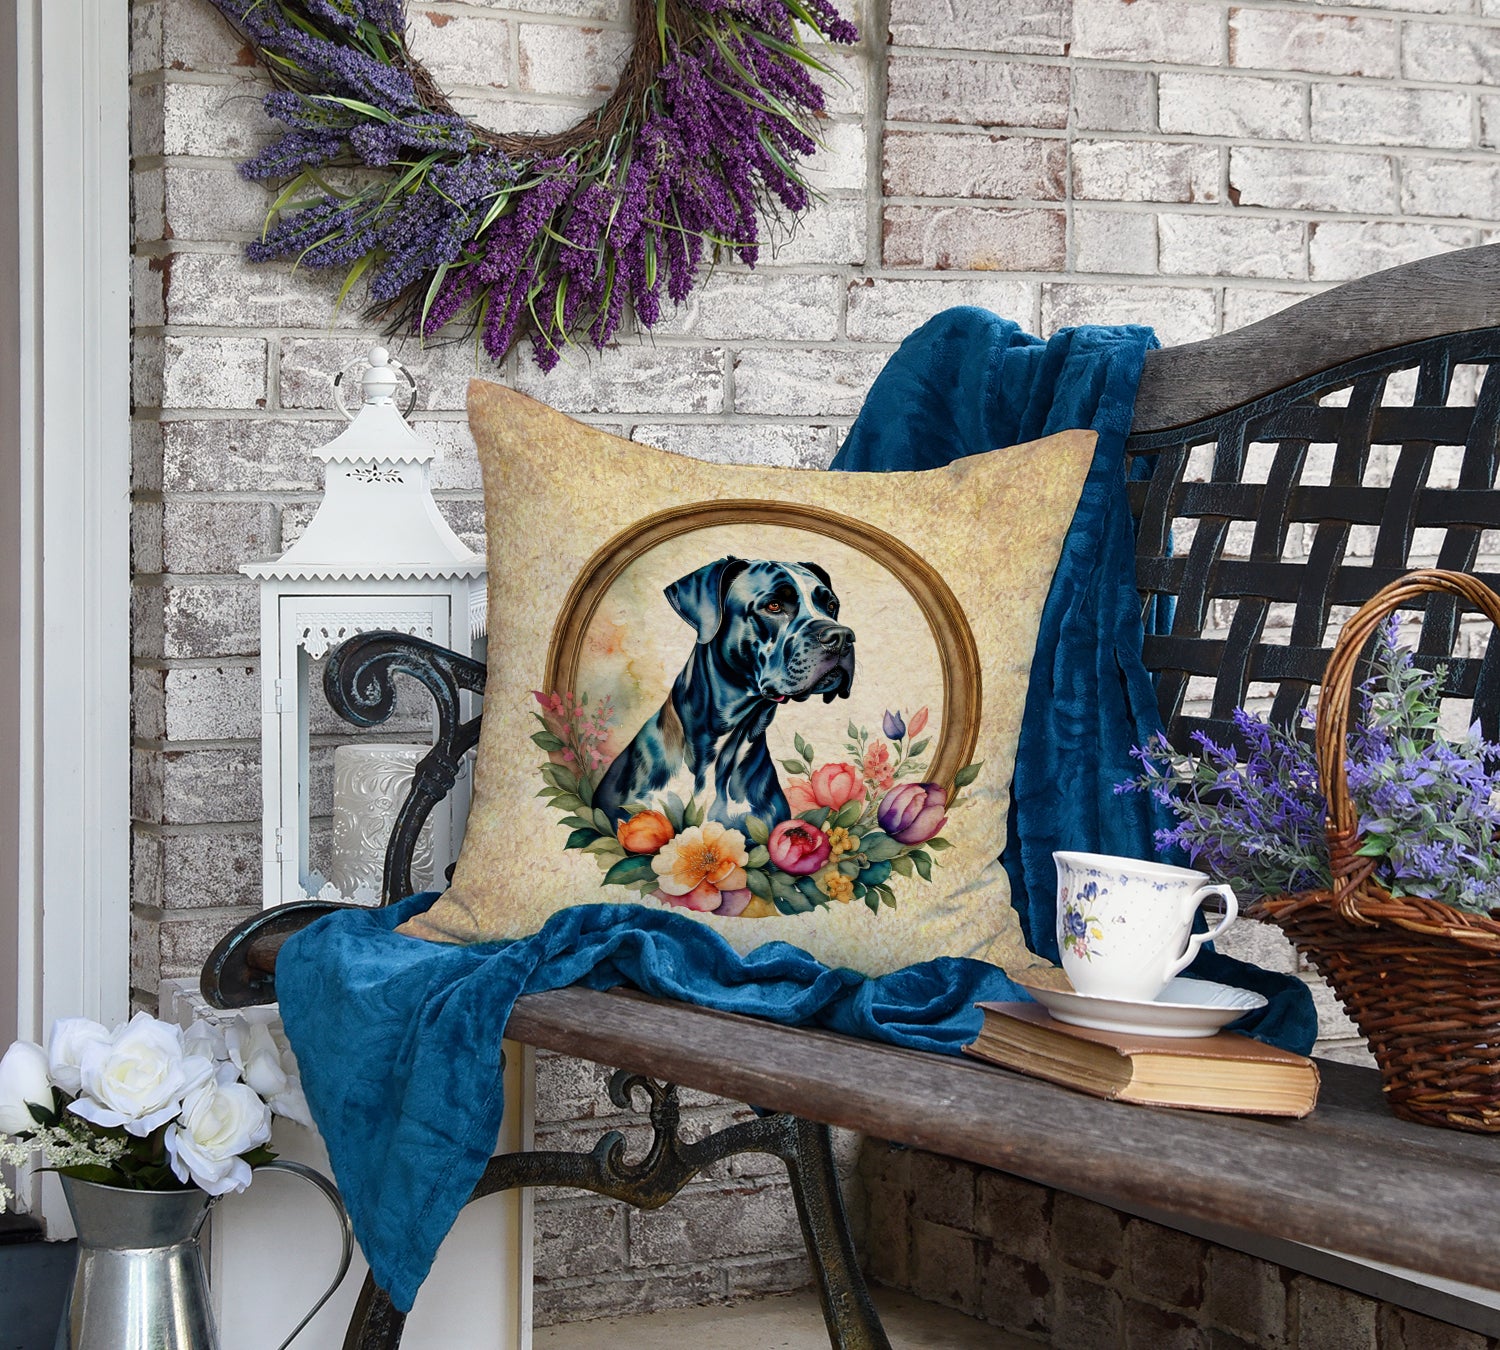 Great Dane and Flowers Fabric Decorative Pillow  the-store.com.